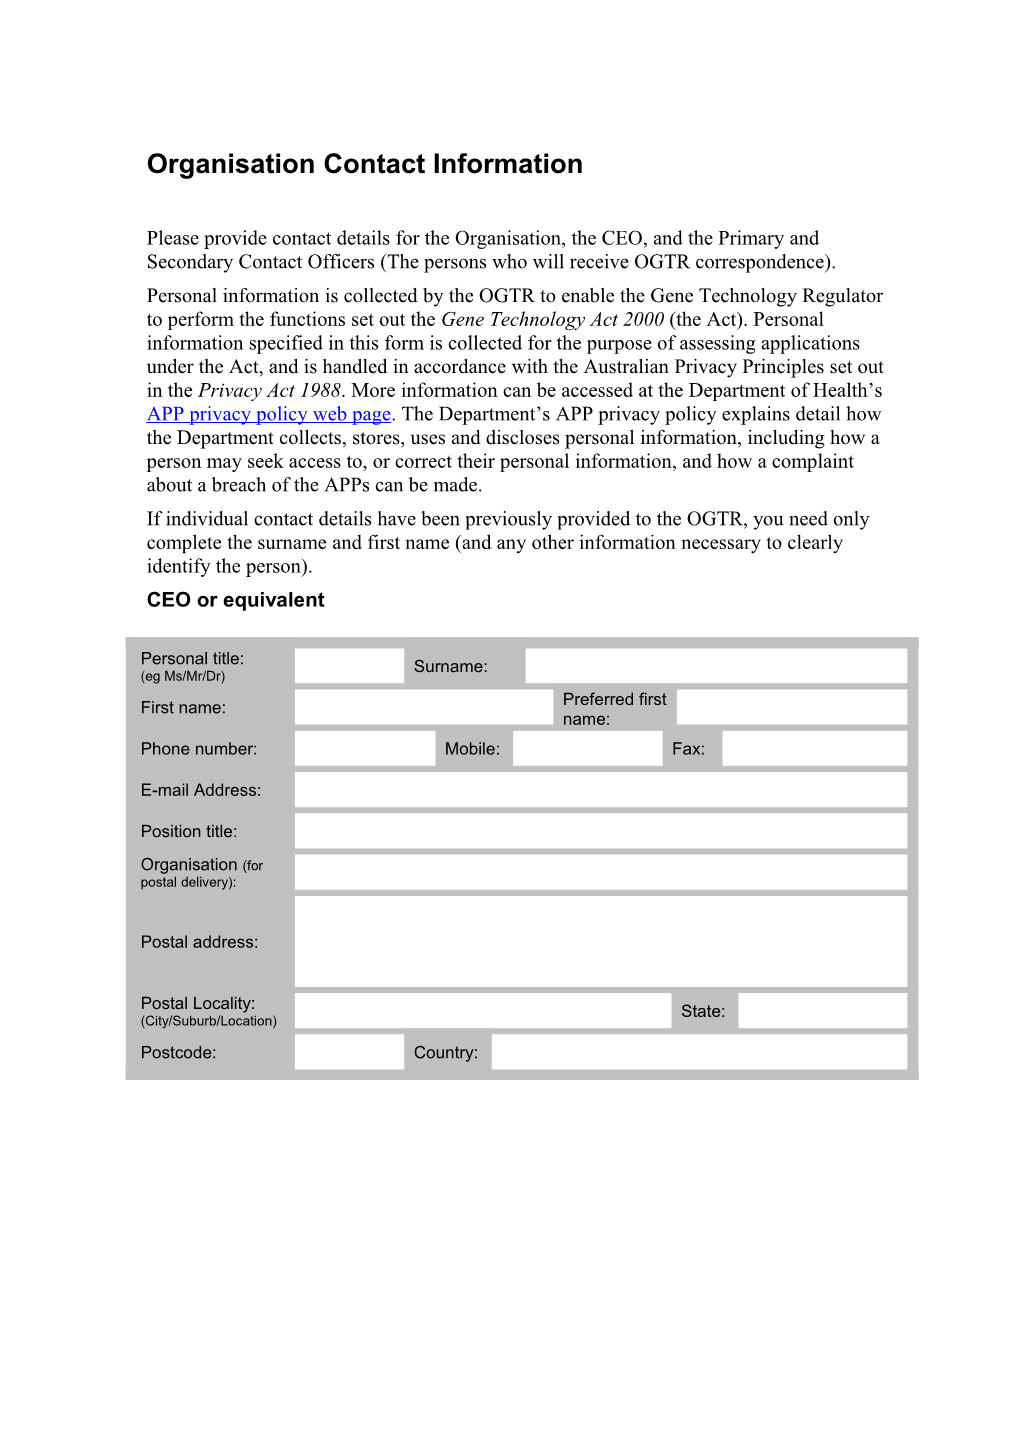 Application for Accreditation of an Organisation